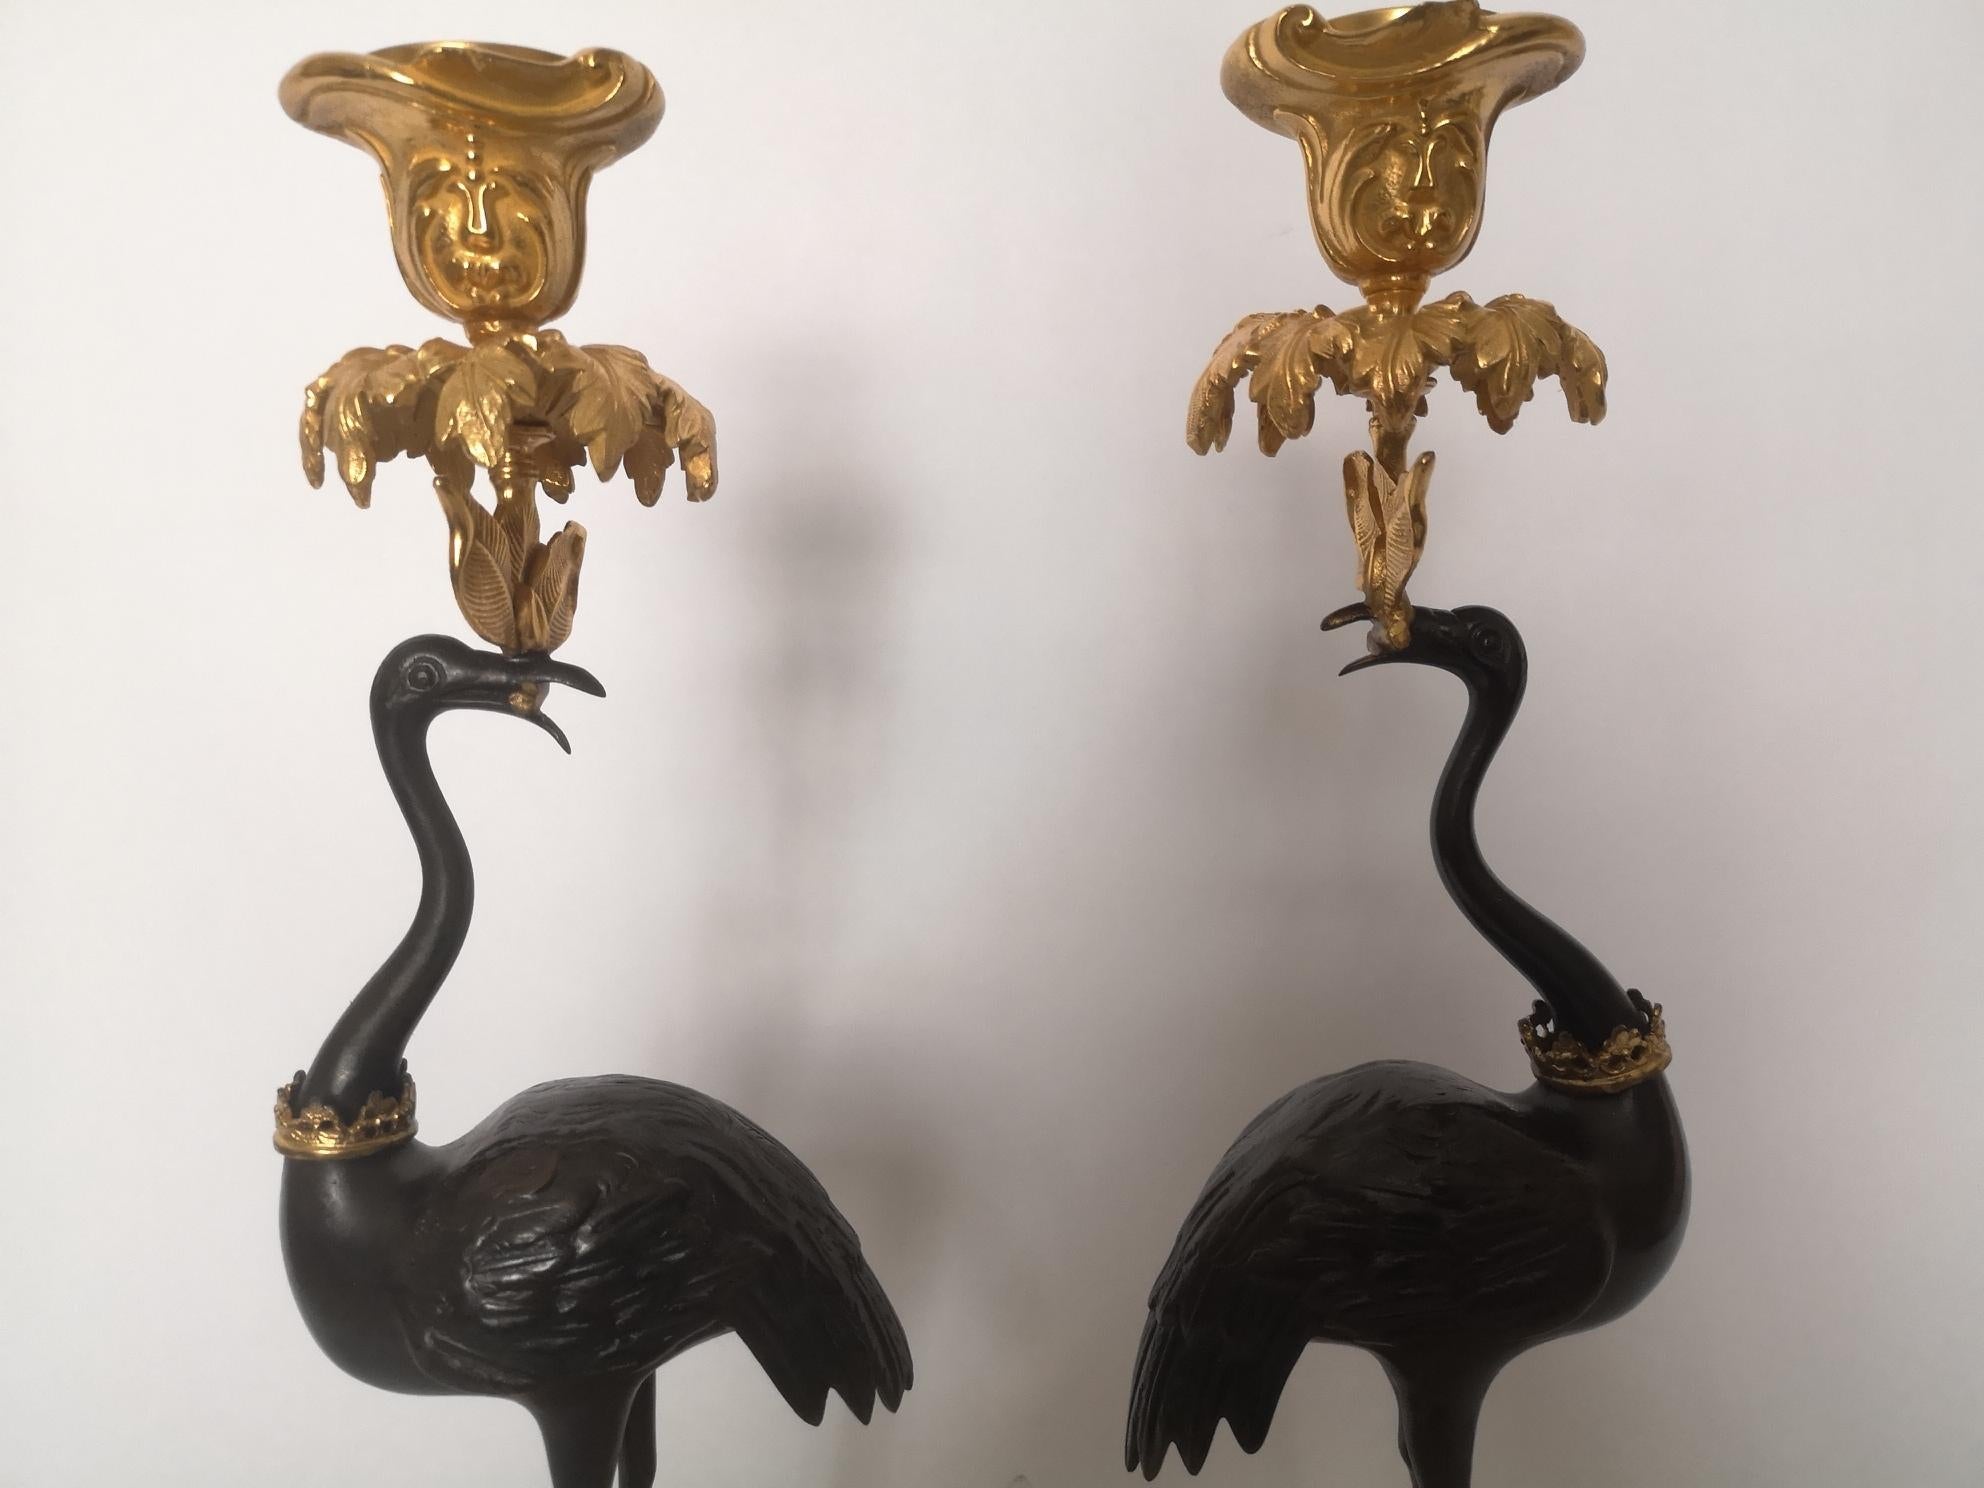 A pair of early 19th century English candlesticks. Modelled as bronze standing storks on rocky gilt bases, the cranes have hold gilt candleholders in their mouths and a gilt crown around their necks.
Signed 'Abbott'
English, circa 1840.